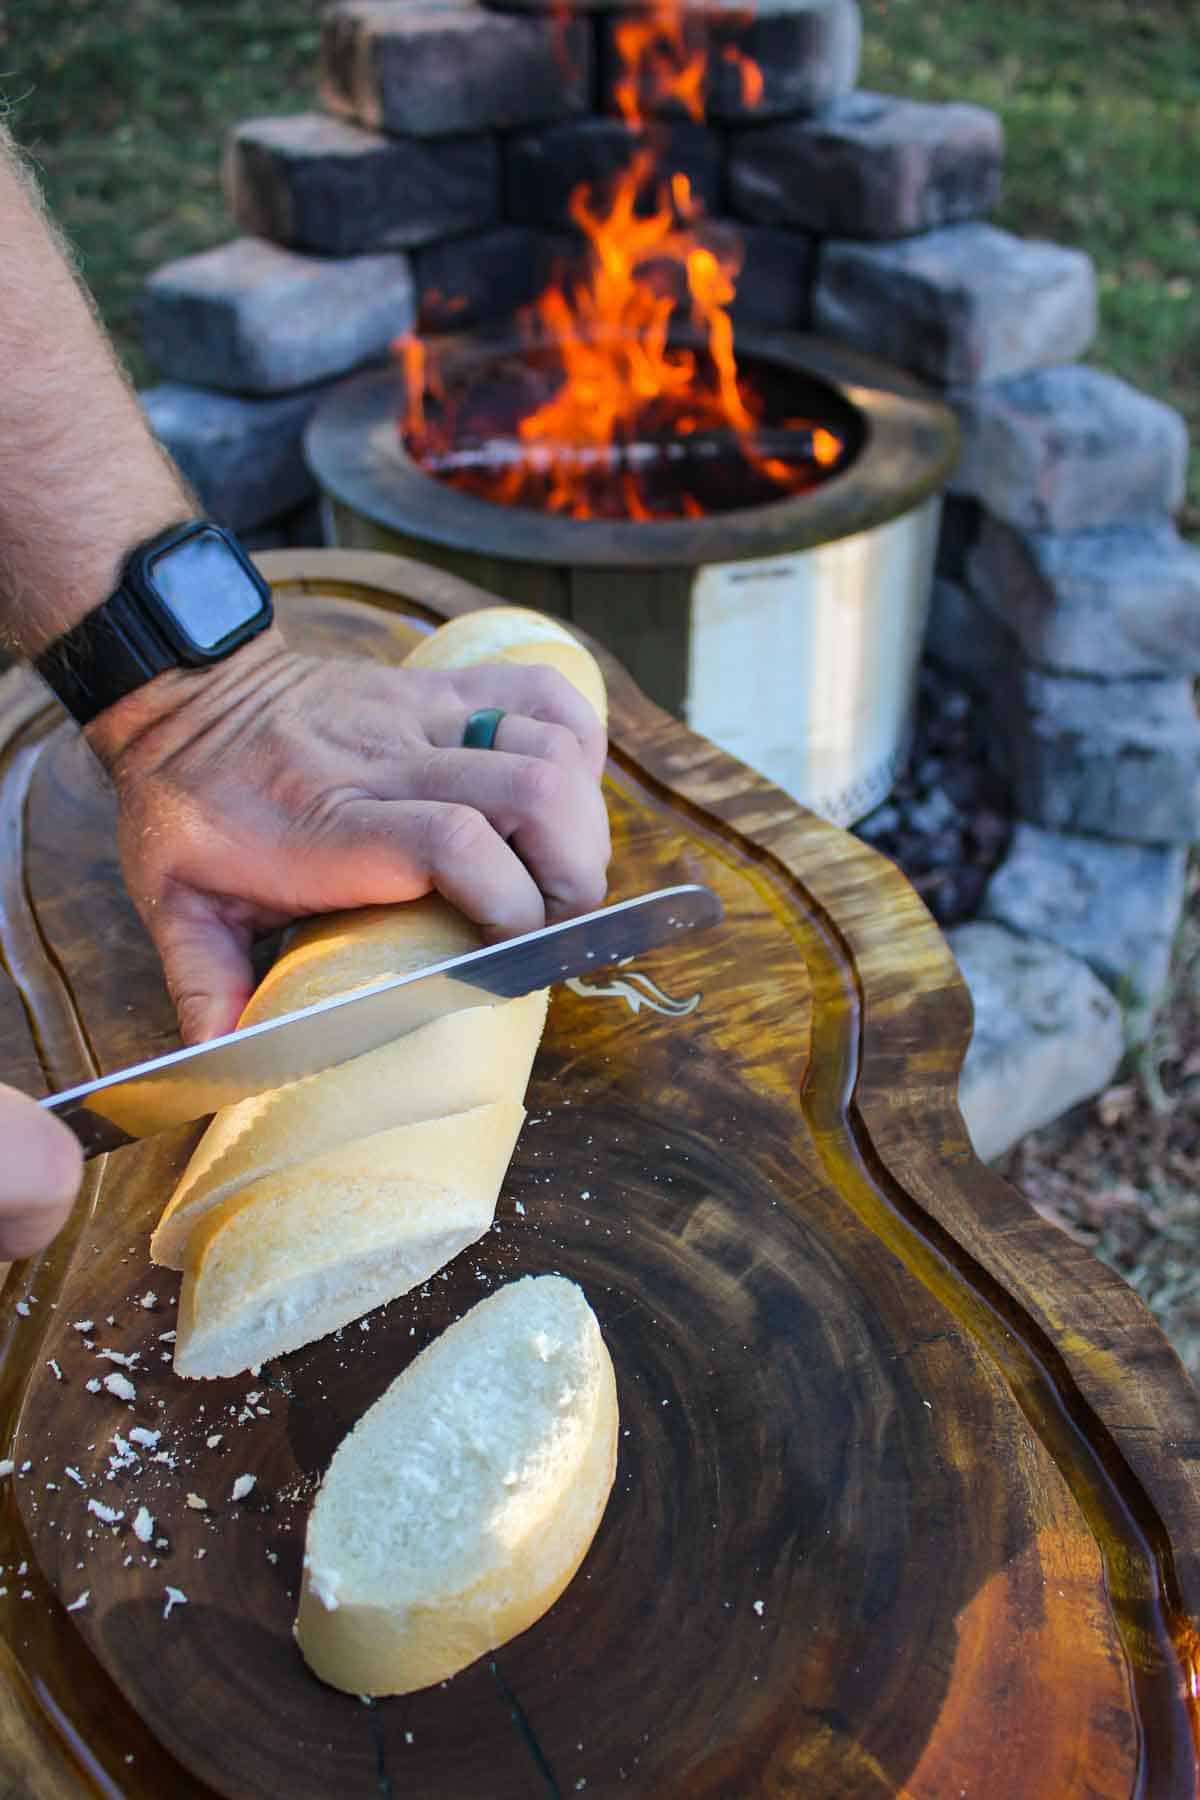 Slicing the bread